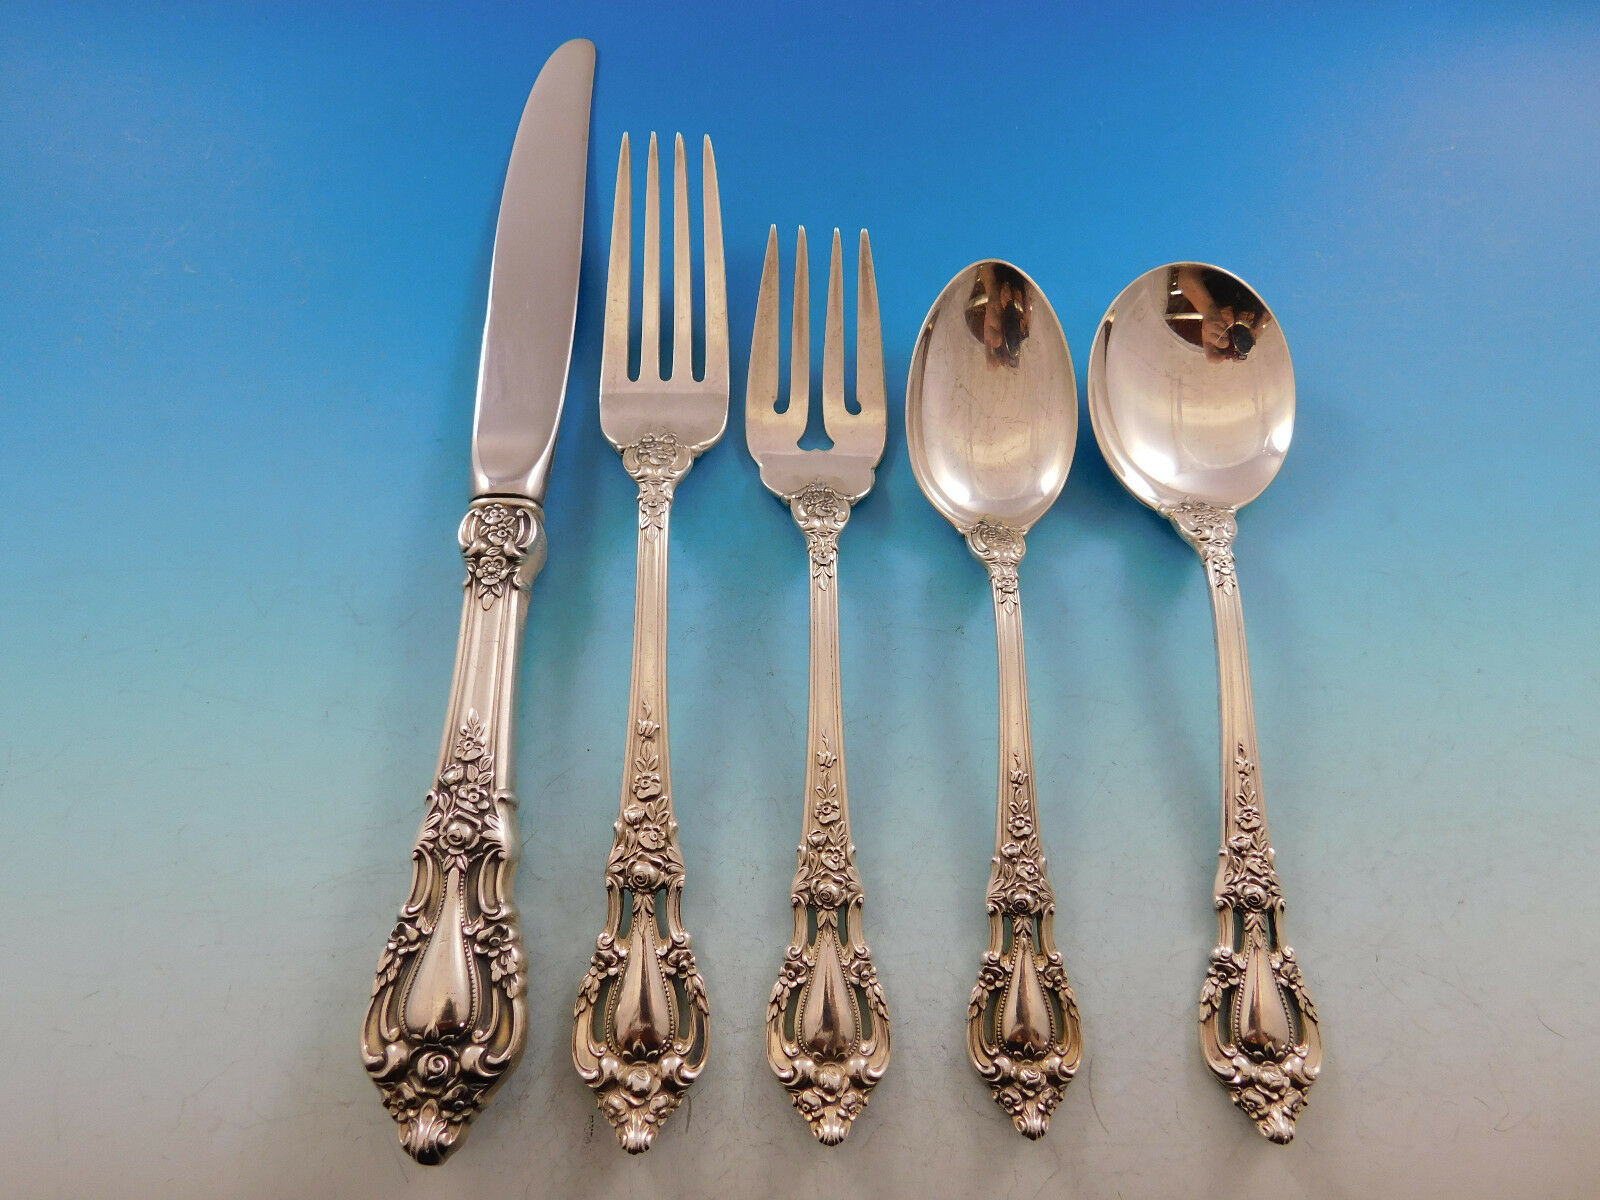 Eloquence by Lunt Sterling Silver Flatware Set for 6 Service 34 Pieces - $2,050.00